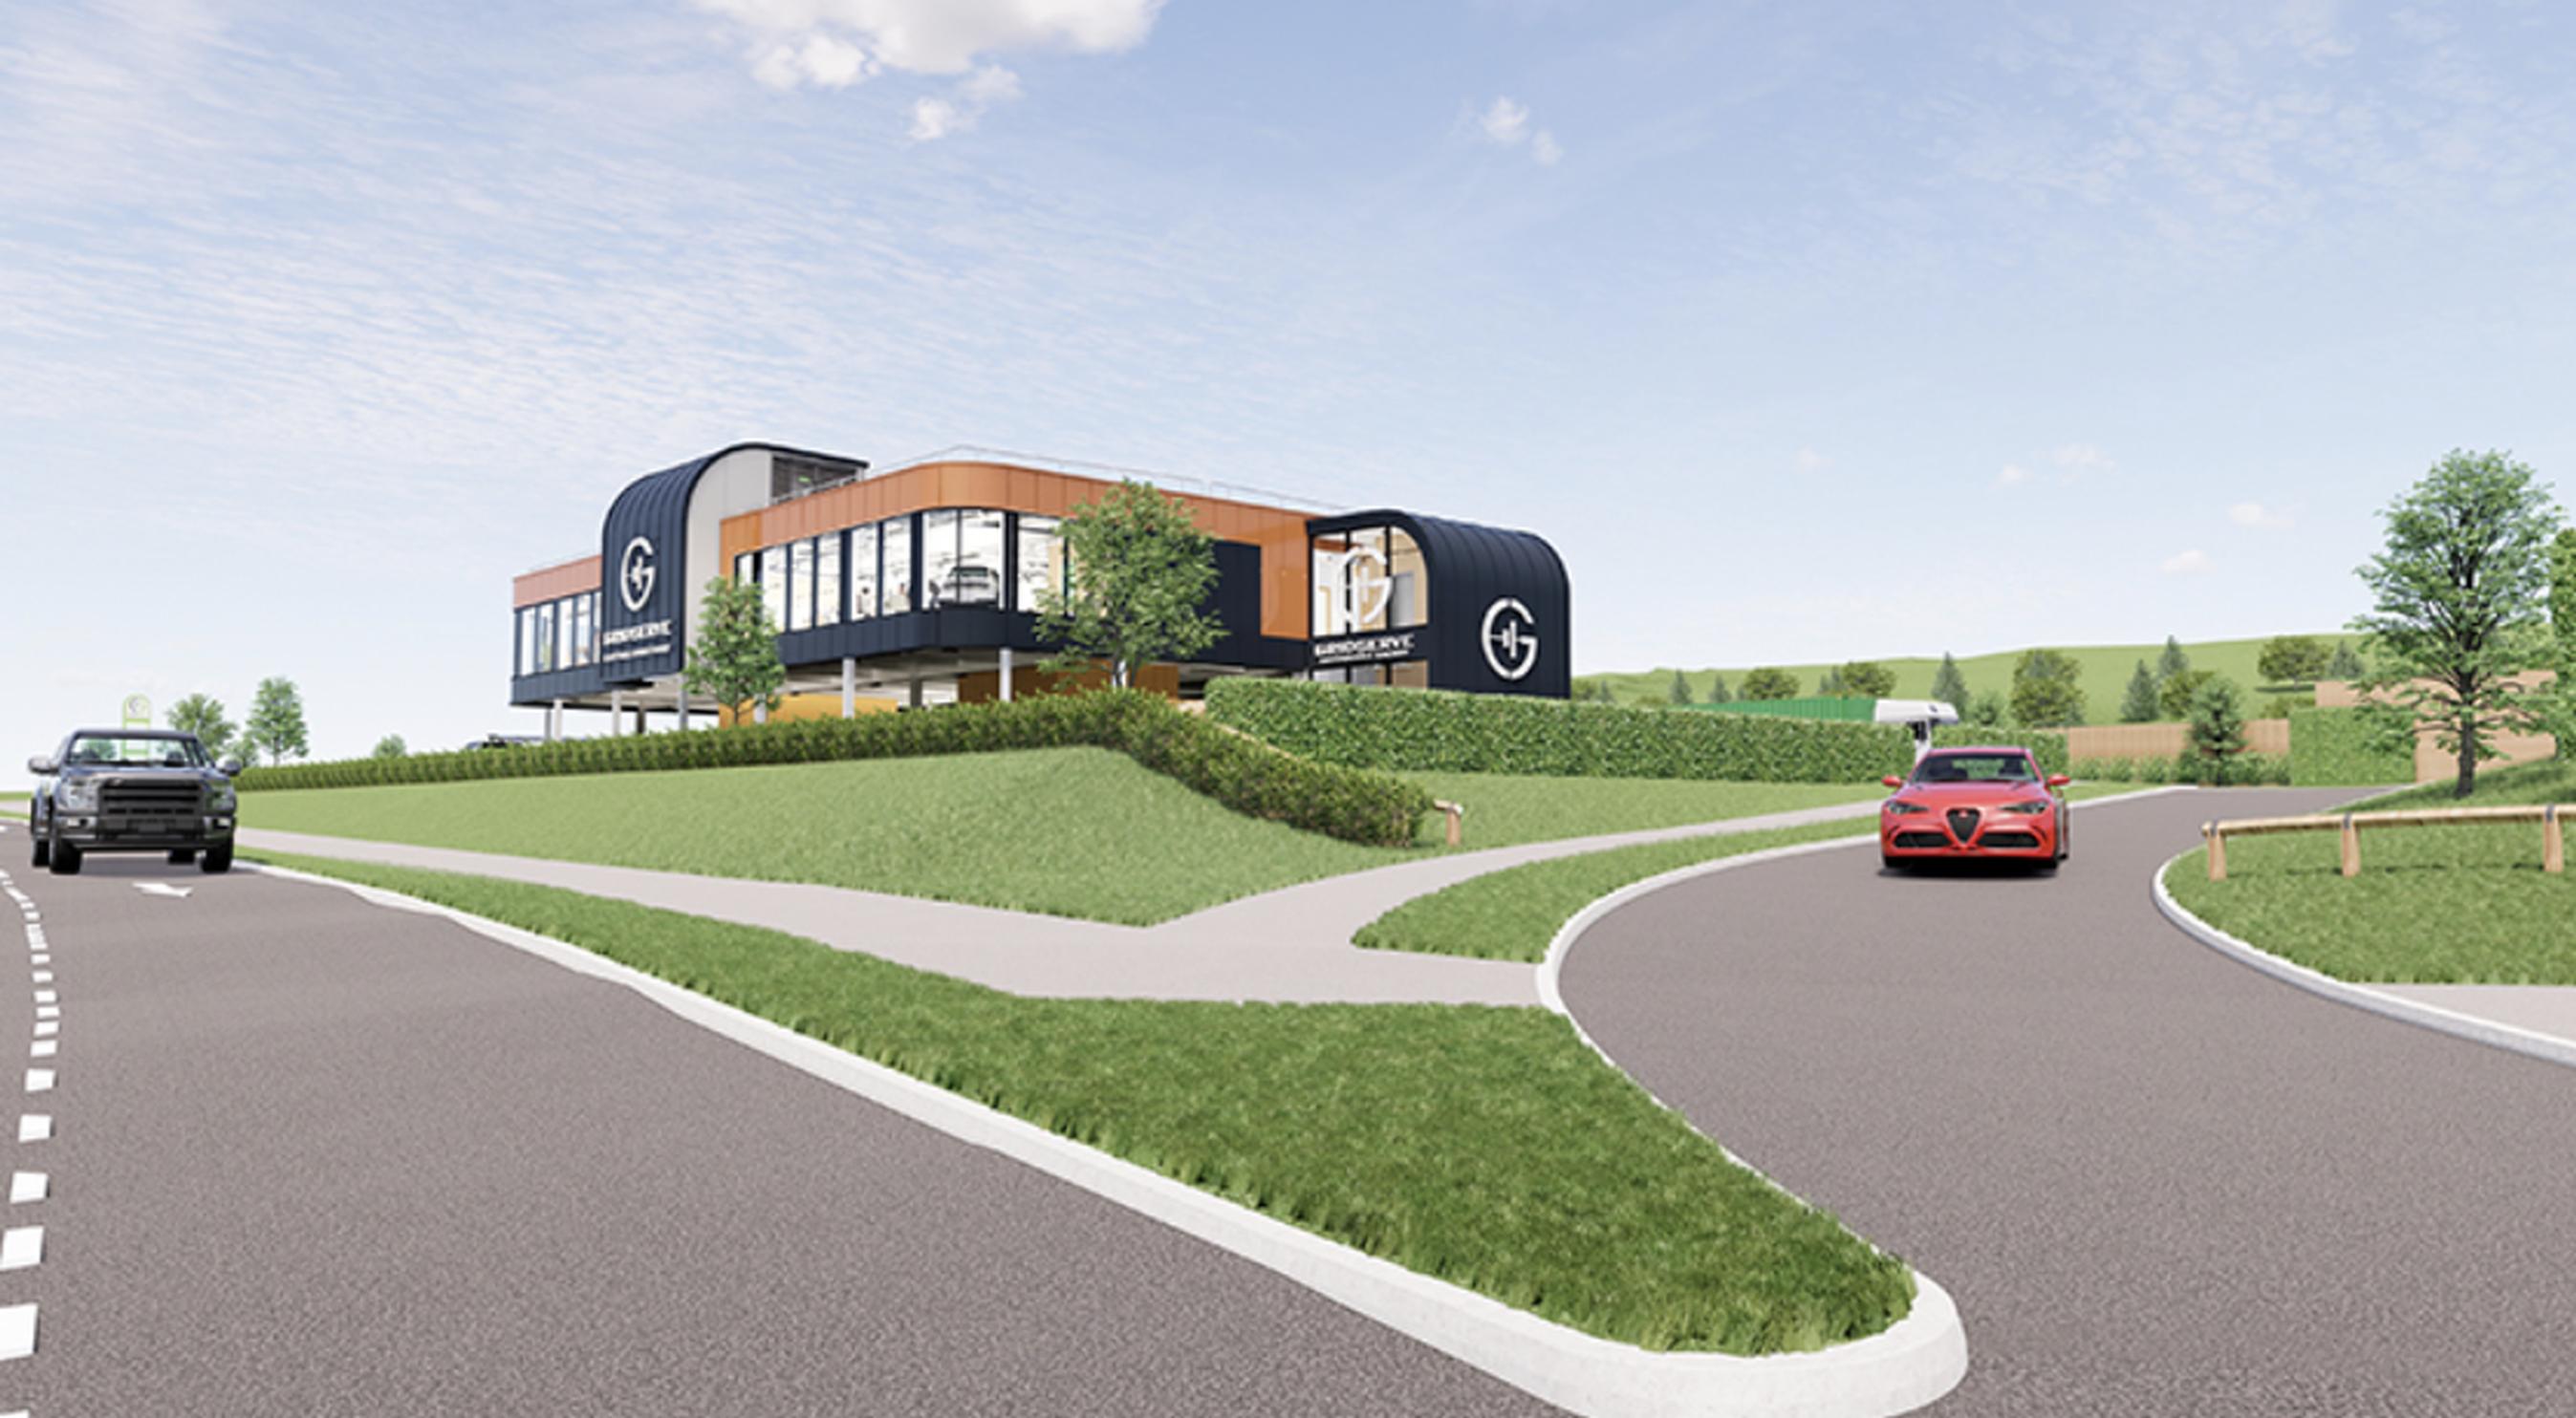 How the Markham Vale Electric Forecourt could look